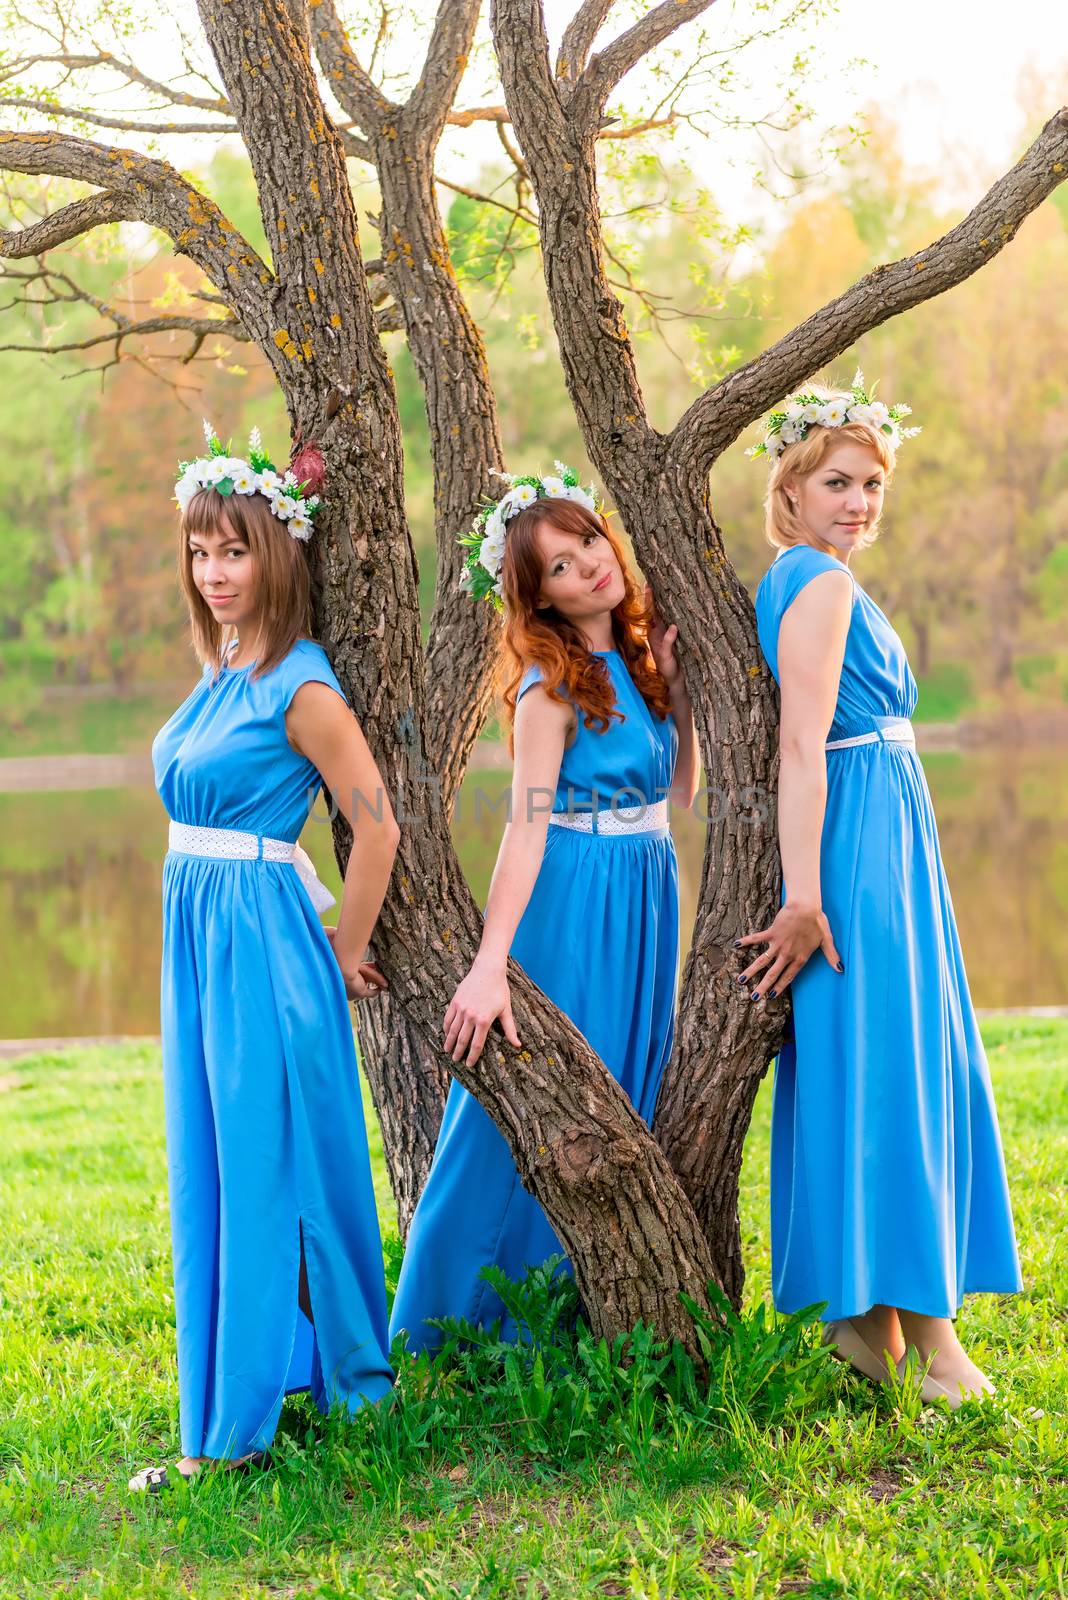 Girls around a tree near the lake on a summer evening by kosmsos111